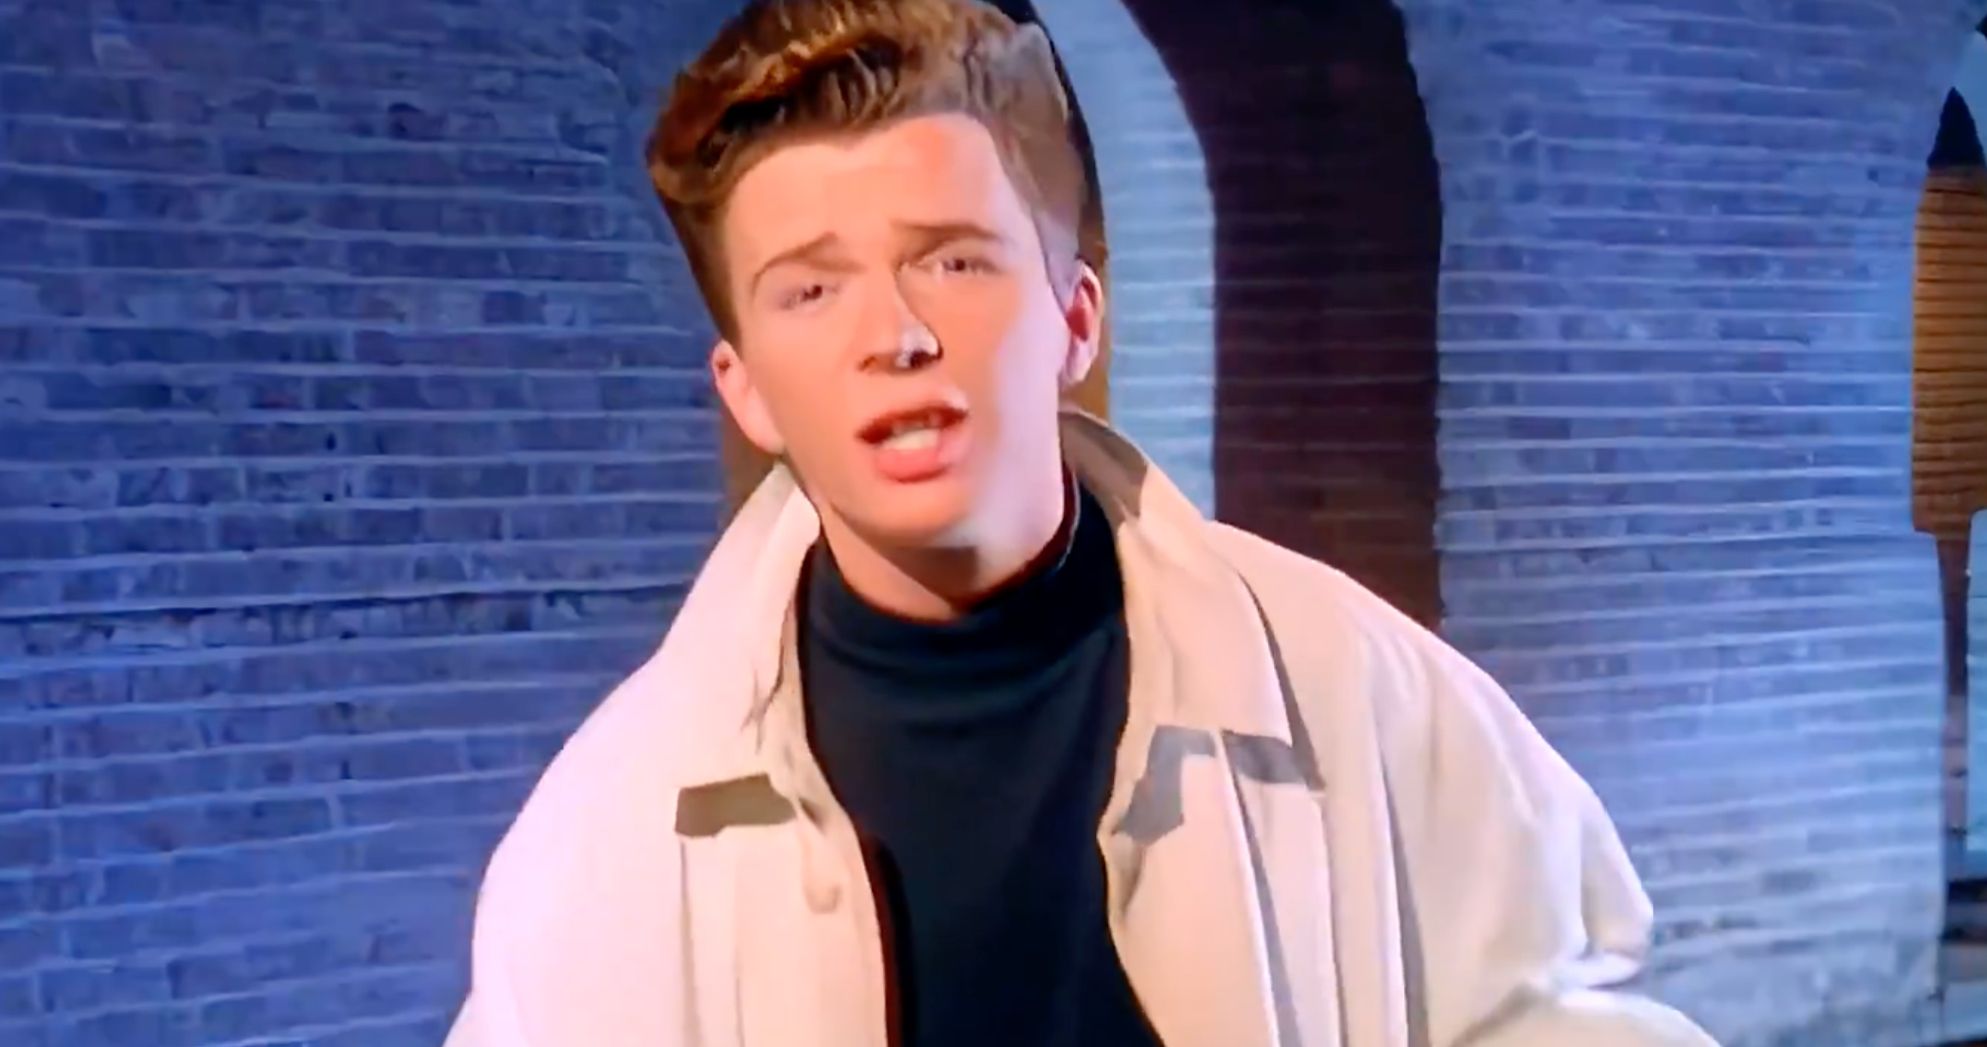 Original Rick Astley 'rickrolling' video removed from  The viral ' rickrolling' phenomenon helped revive the Eighties